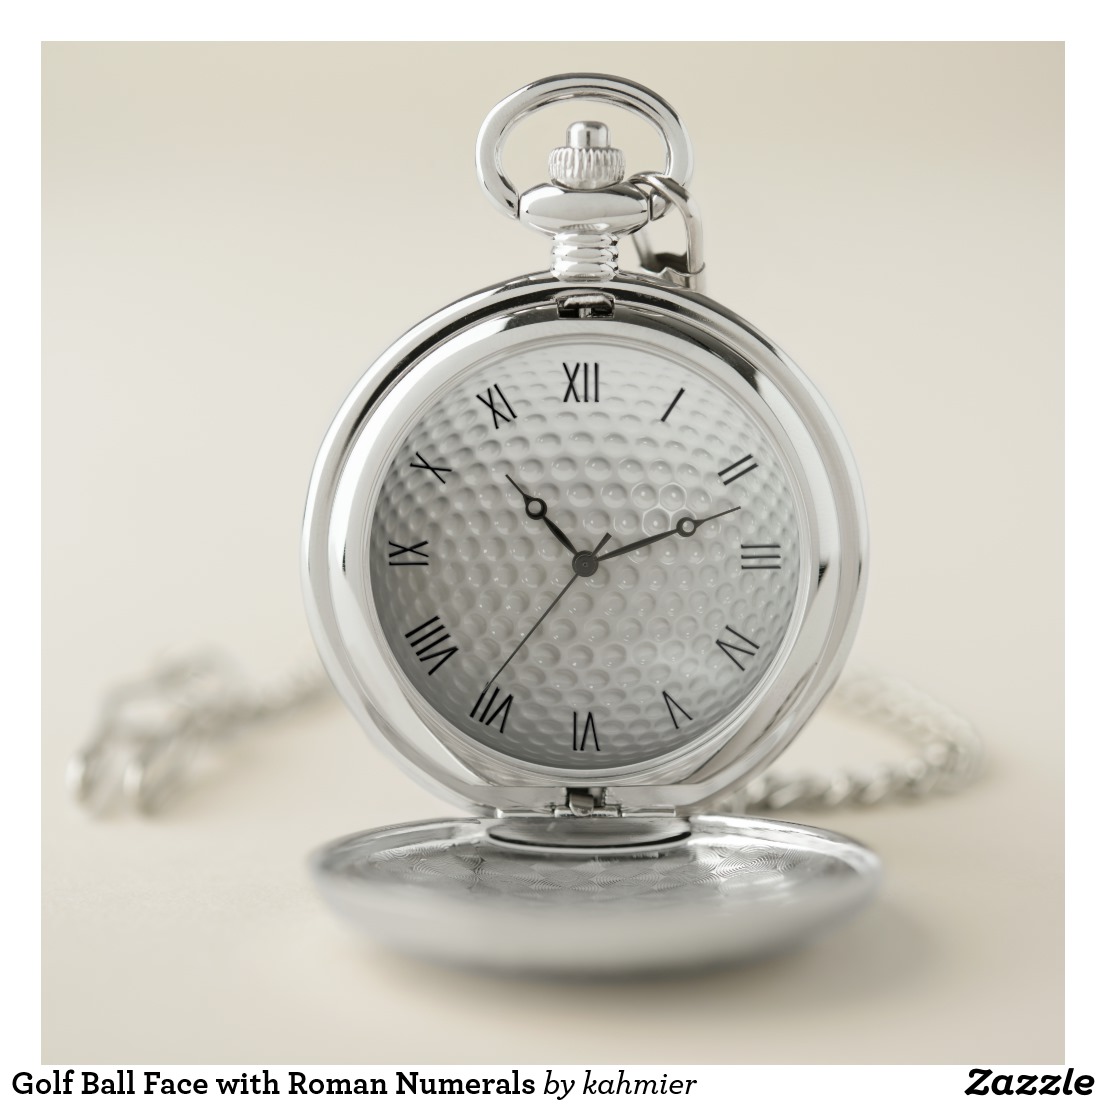 Golf Ball Face with Roman Numerals Pocket Watch